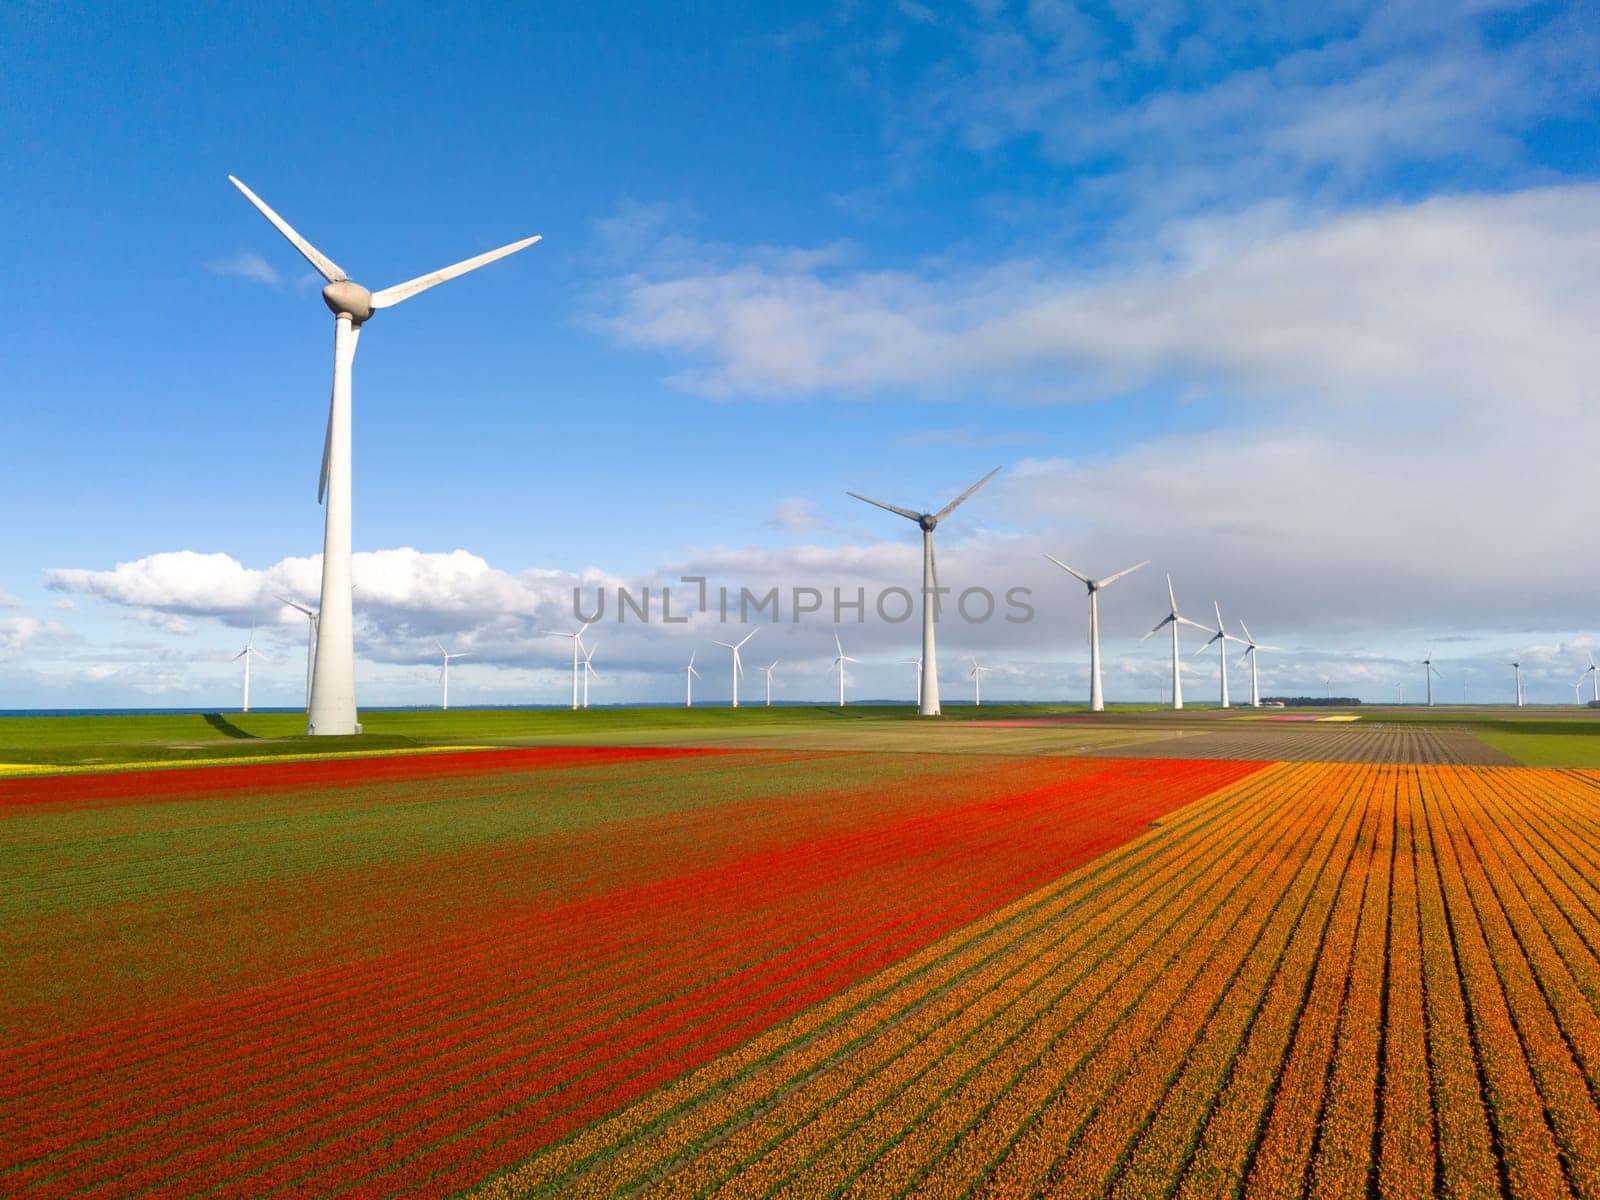 windmill park with spring flowers and a blue sky, drone view from above windmill park in the Netherlands aerial view with wind turbine and tulip flowers, Green energy, energy transition